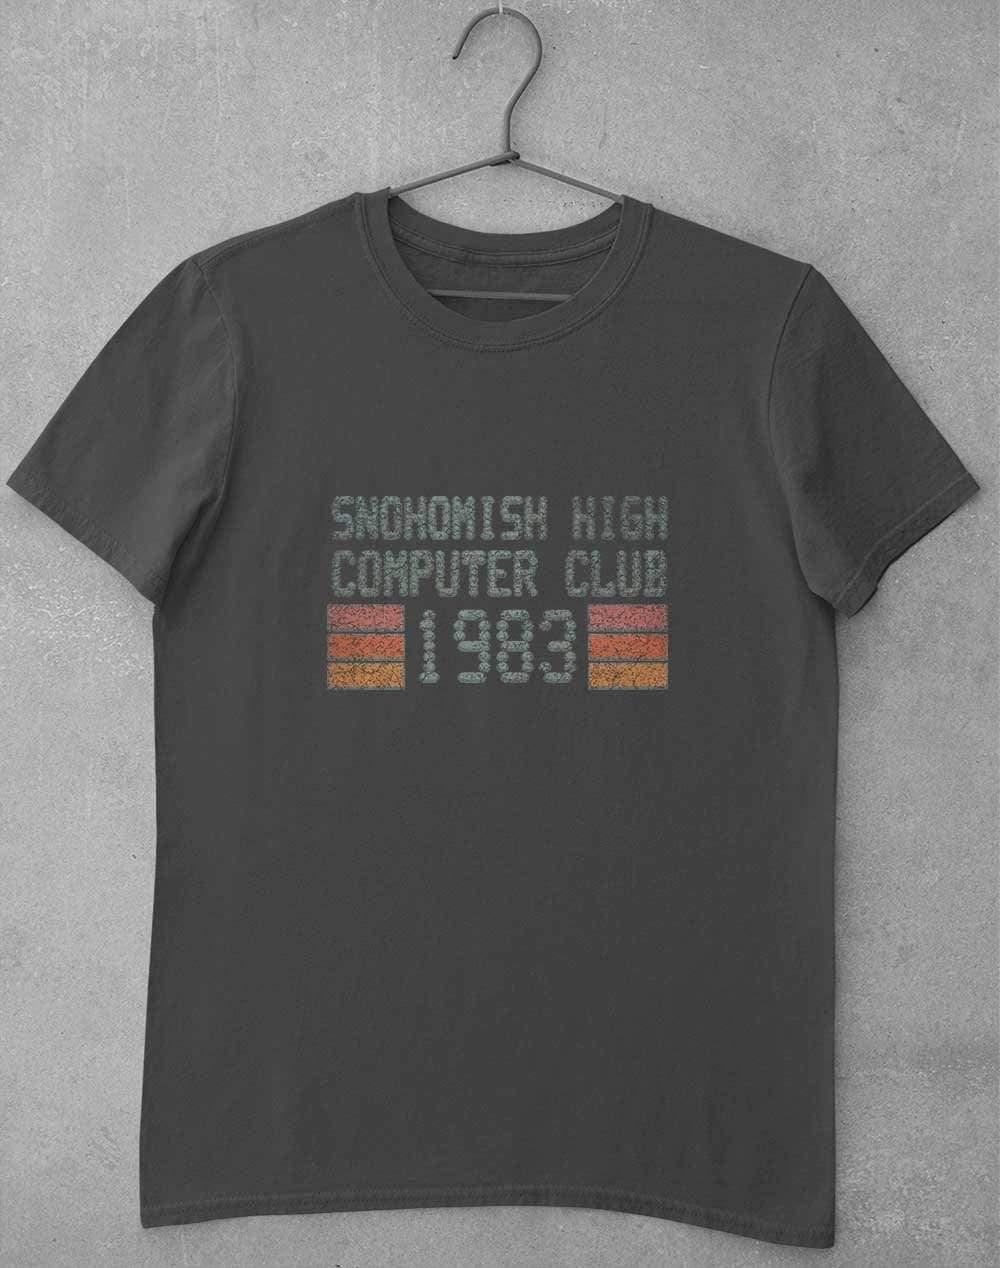 Snohomish High Computer Club 1983 T-Shirt S / Charcoal  - Off World Tees